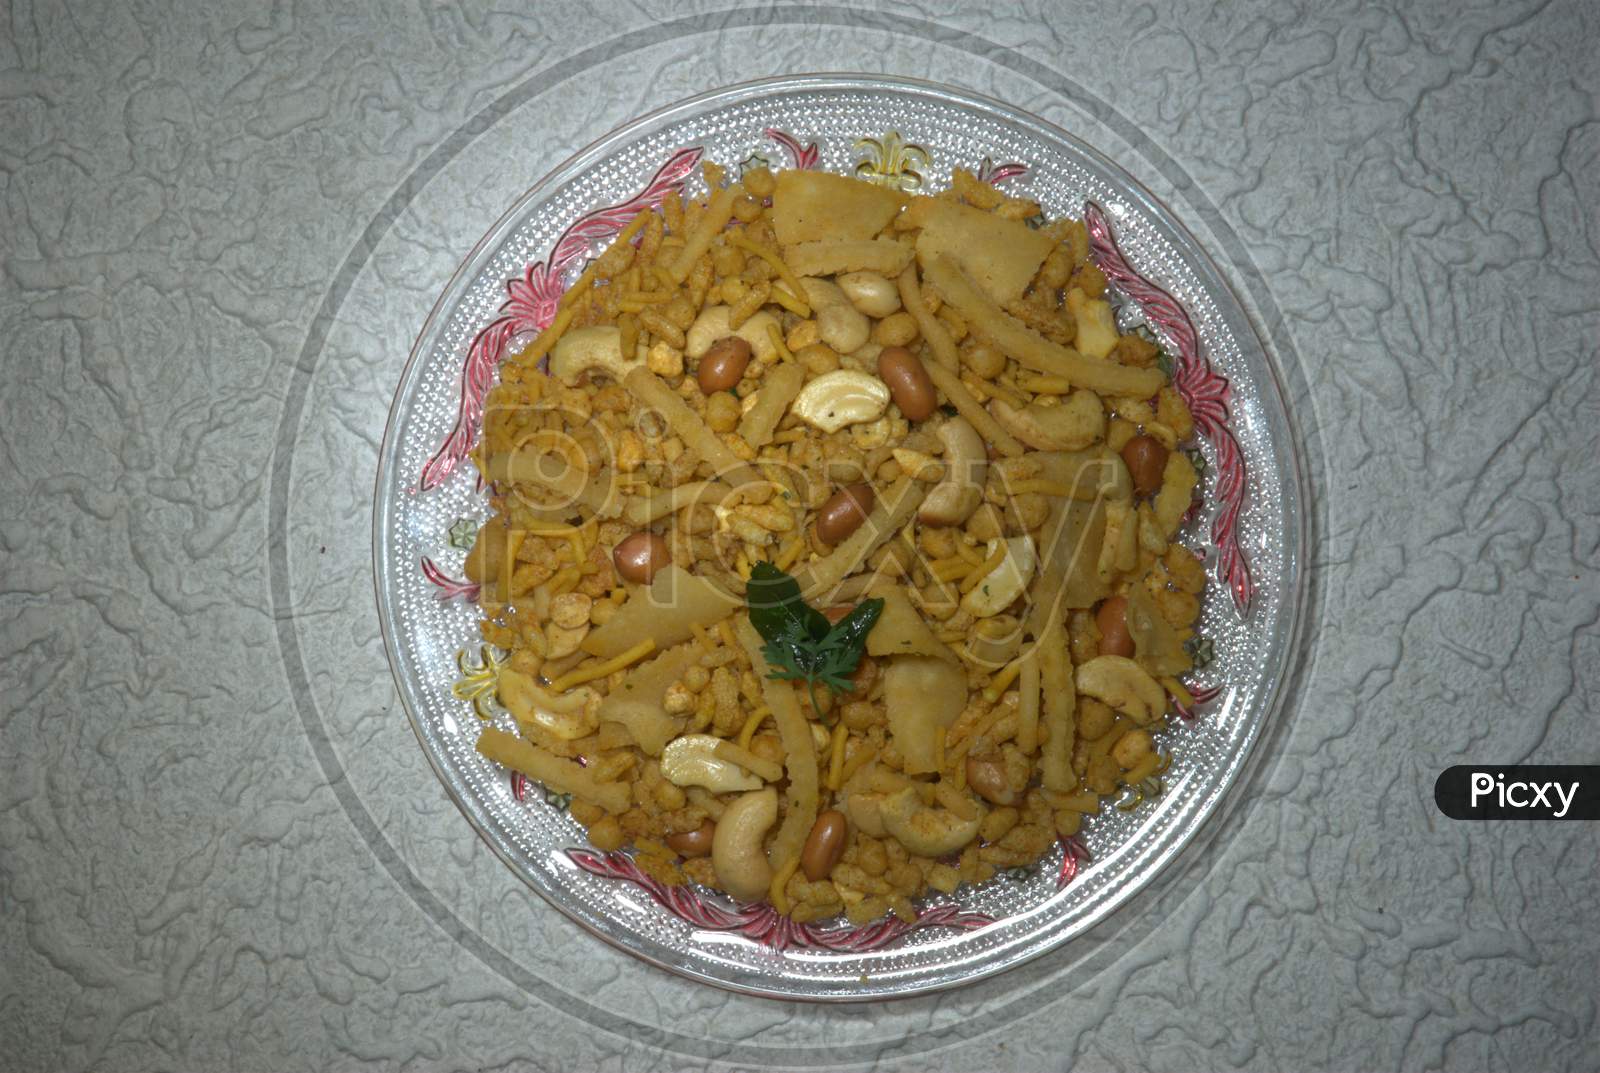 Indian Snacks Mixture Served In a Bowl